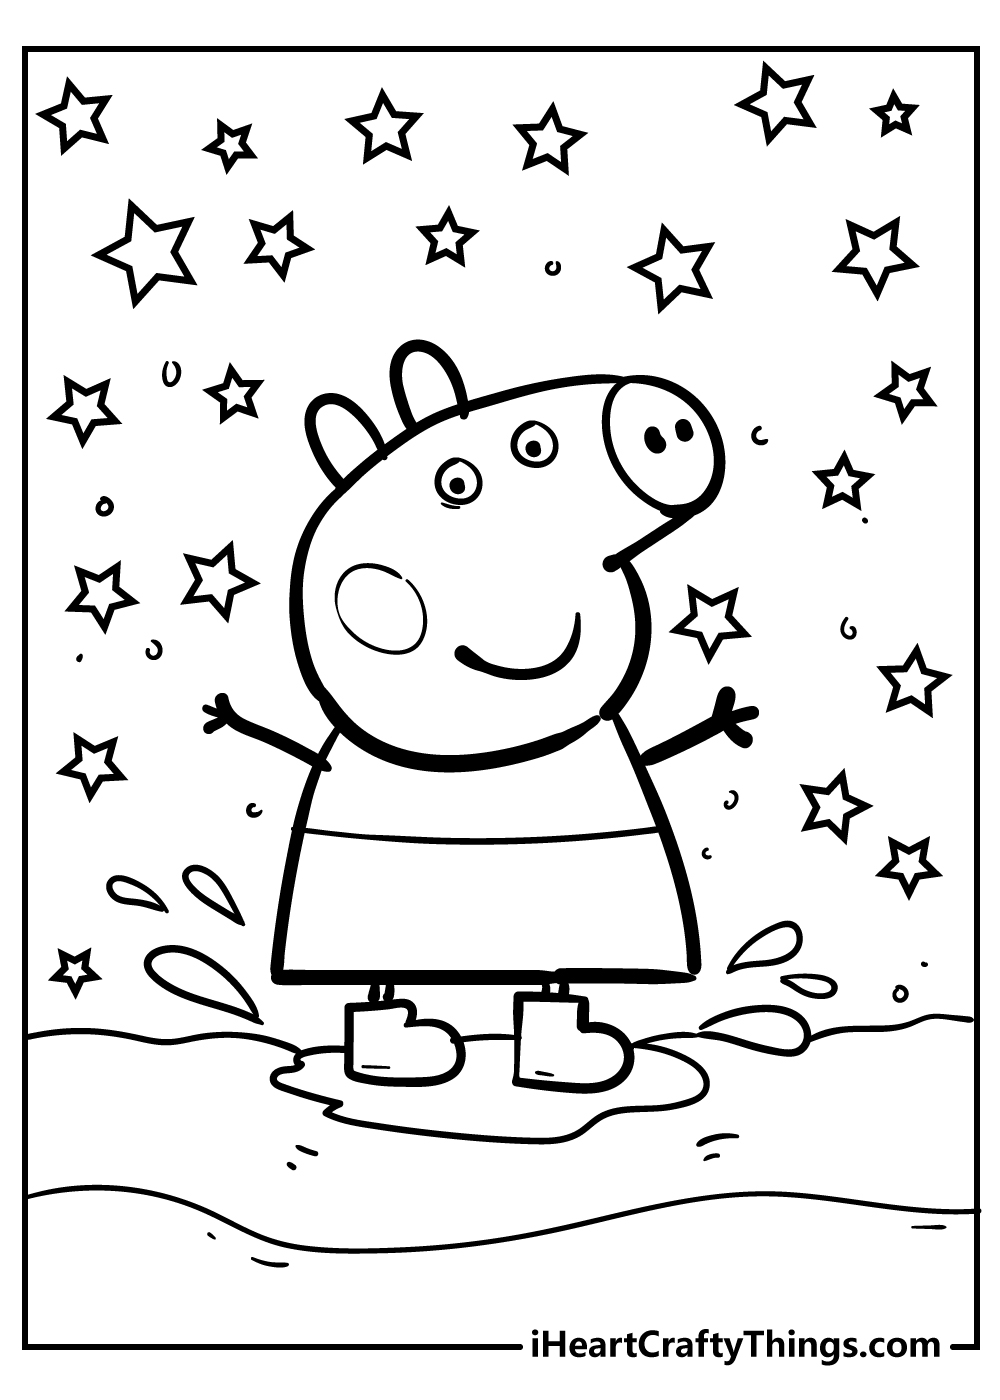 Peppa Pig coloring sheet for children free download